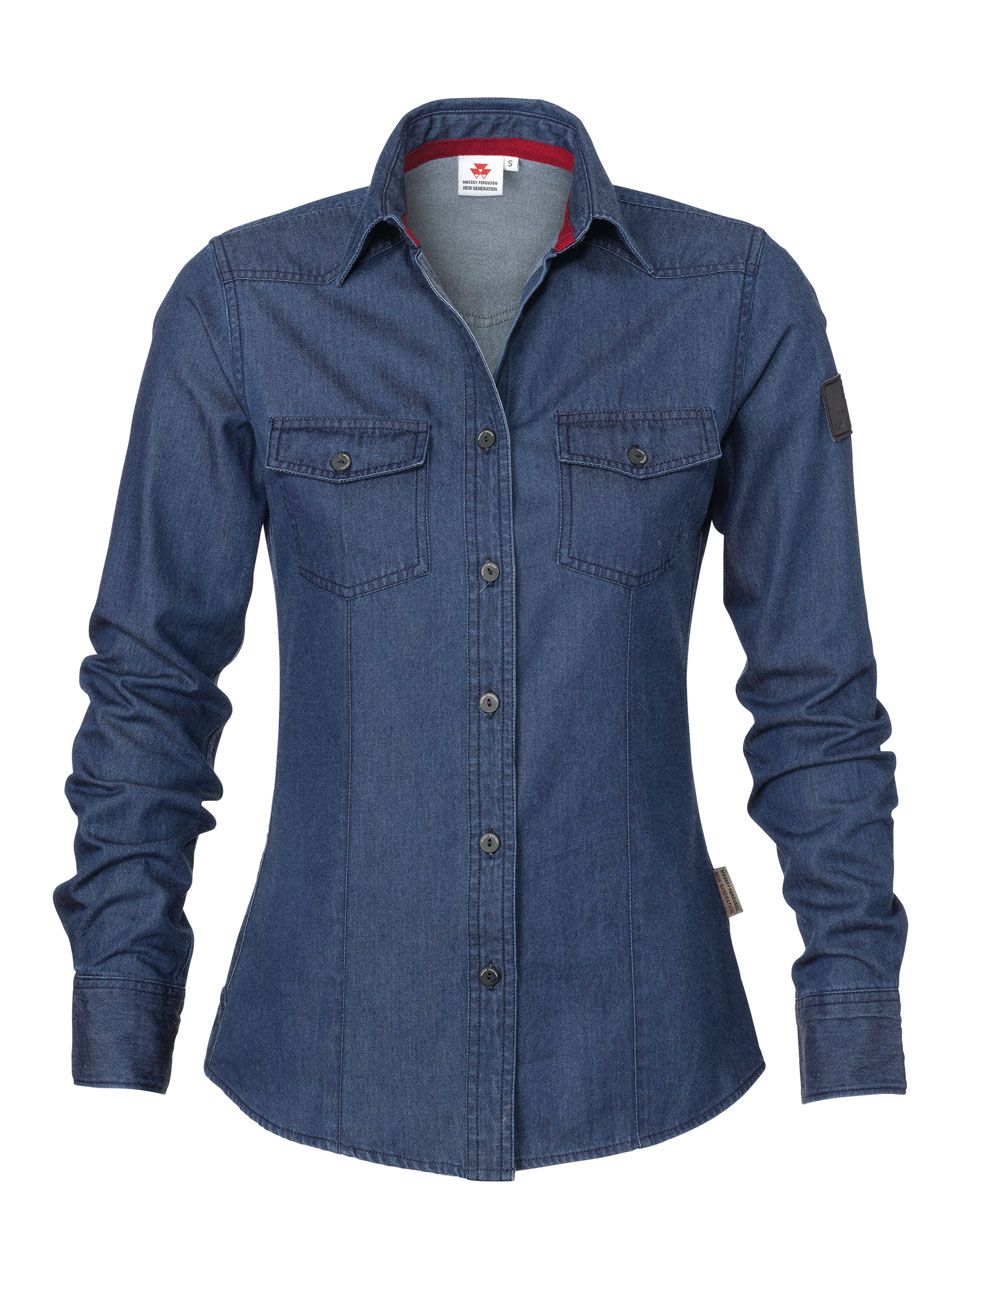 20 Stunning Models of Denim Shirts for Womens in Trend